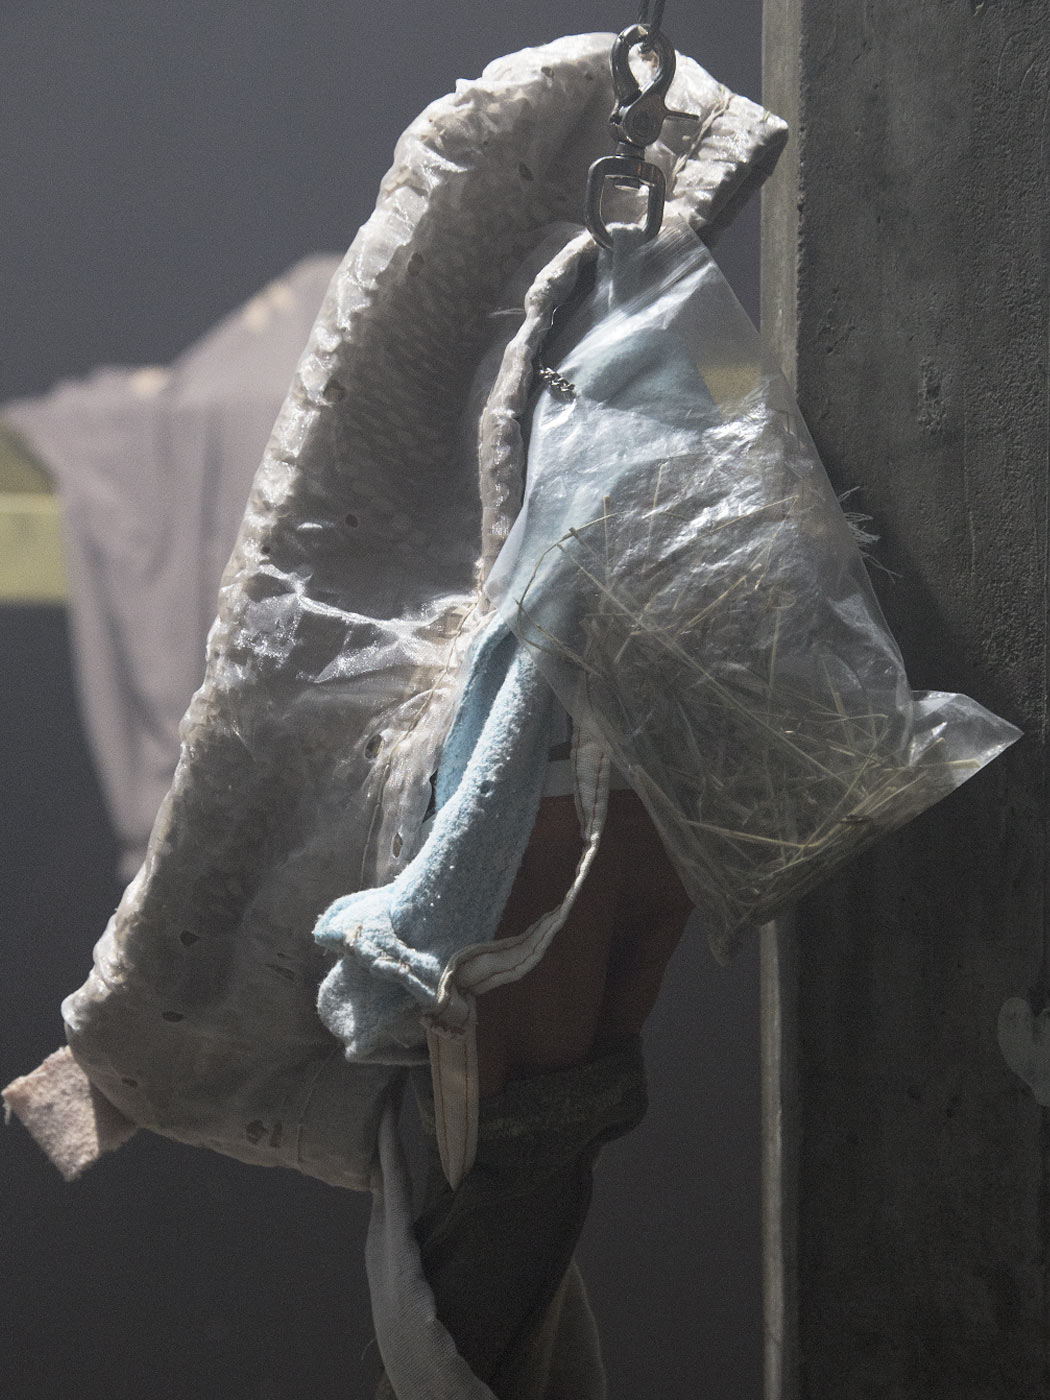 A bag filled with hay, leaning against an elongated, beige object made of laserscrim, underneath a blue pole made of textile, from which white textile strips snake out along a sleeve hem.